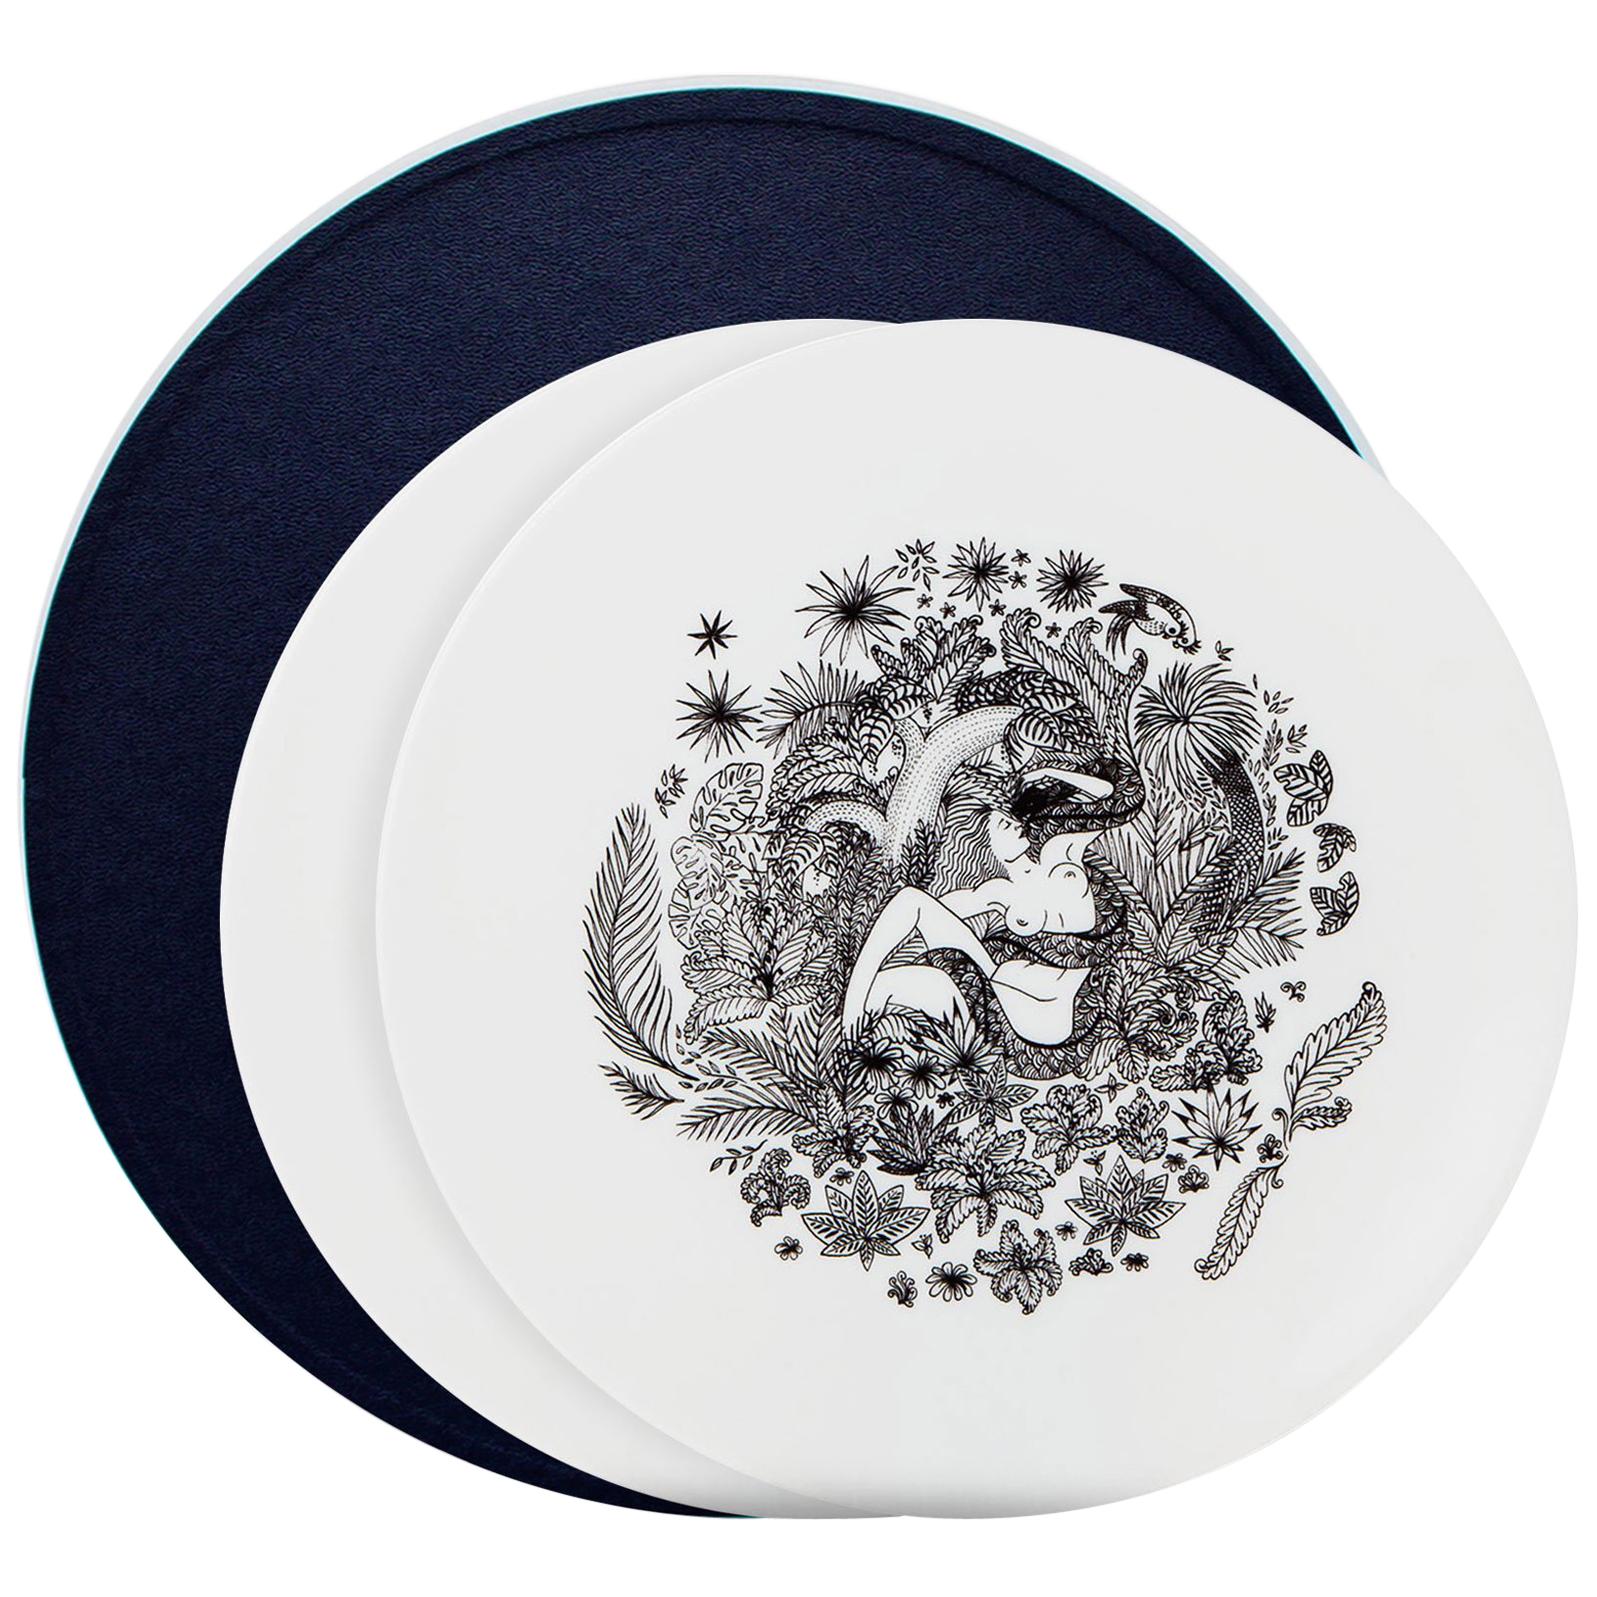 Box of 2 Dinner Porcelain Plates Without Gold Collection Rue de Paradis For Sale